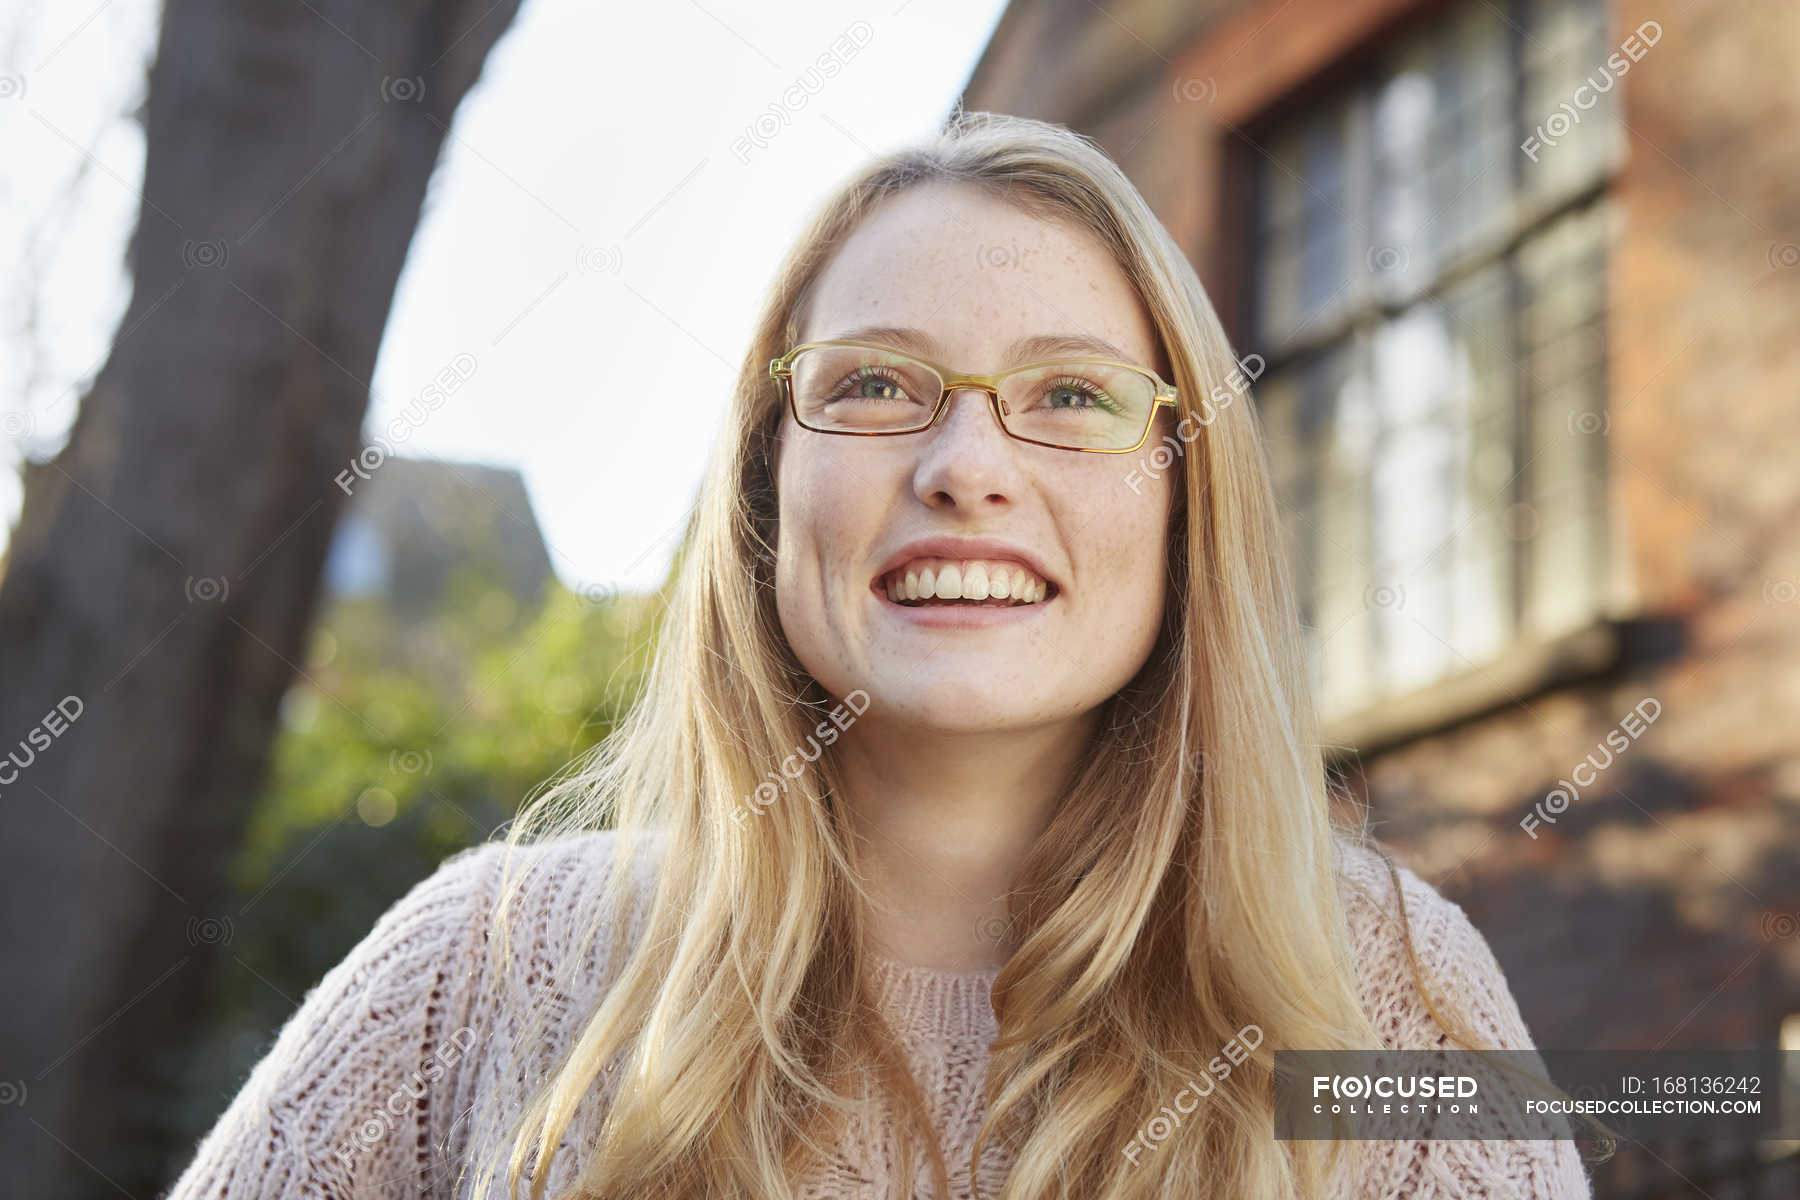 Portrait Of Young Woman Outdoors Long Blonde Hair And Glasses